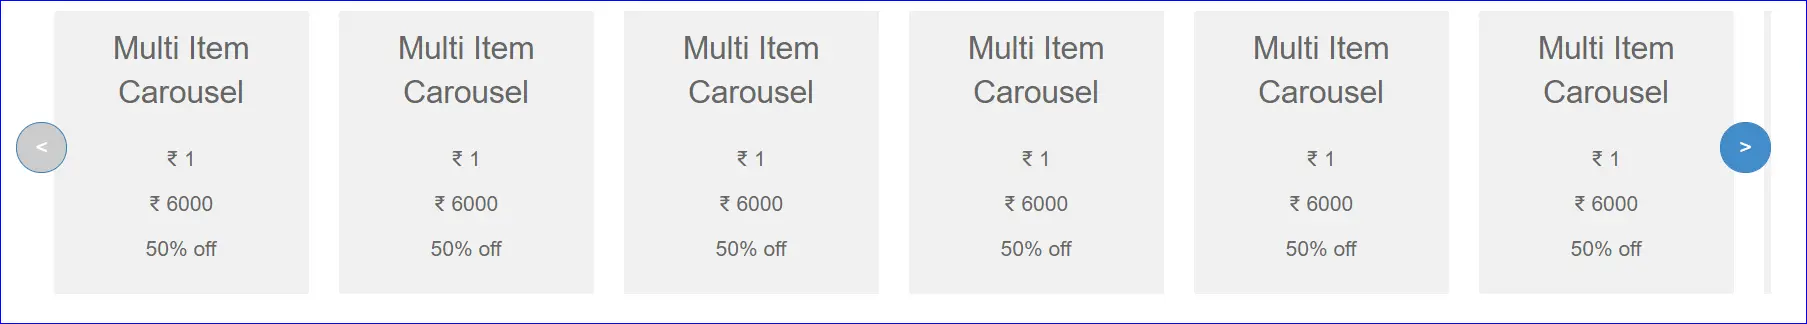 Simple Bootstrap Carousel multiiple items